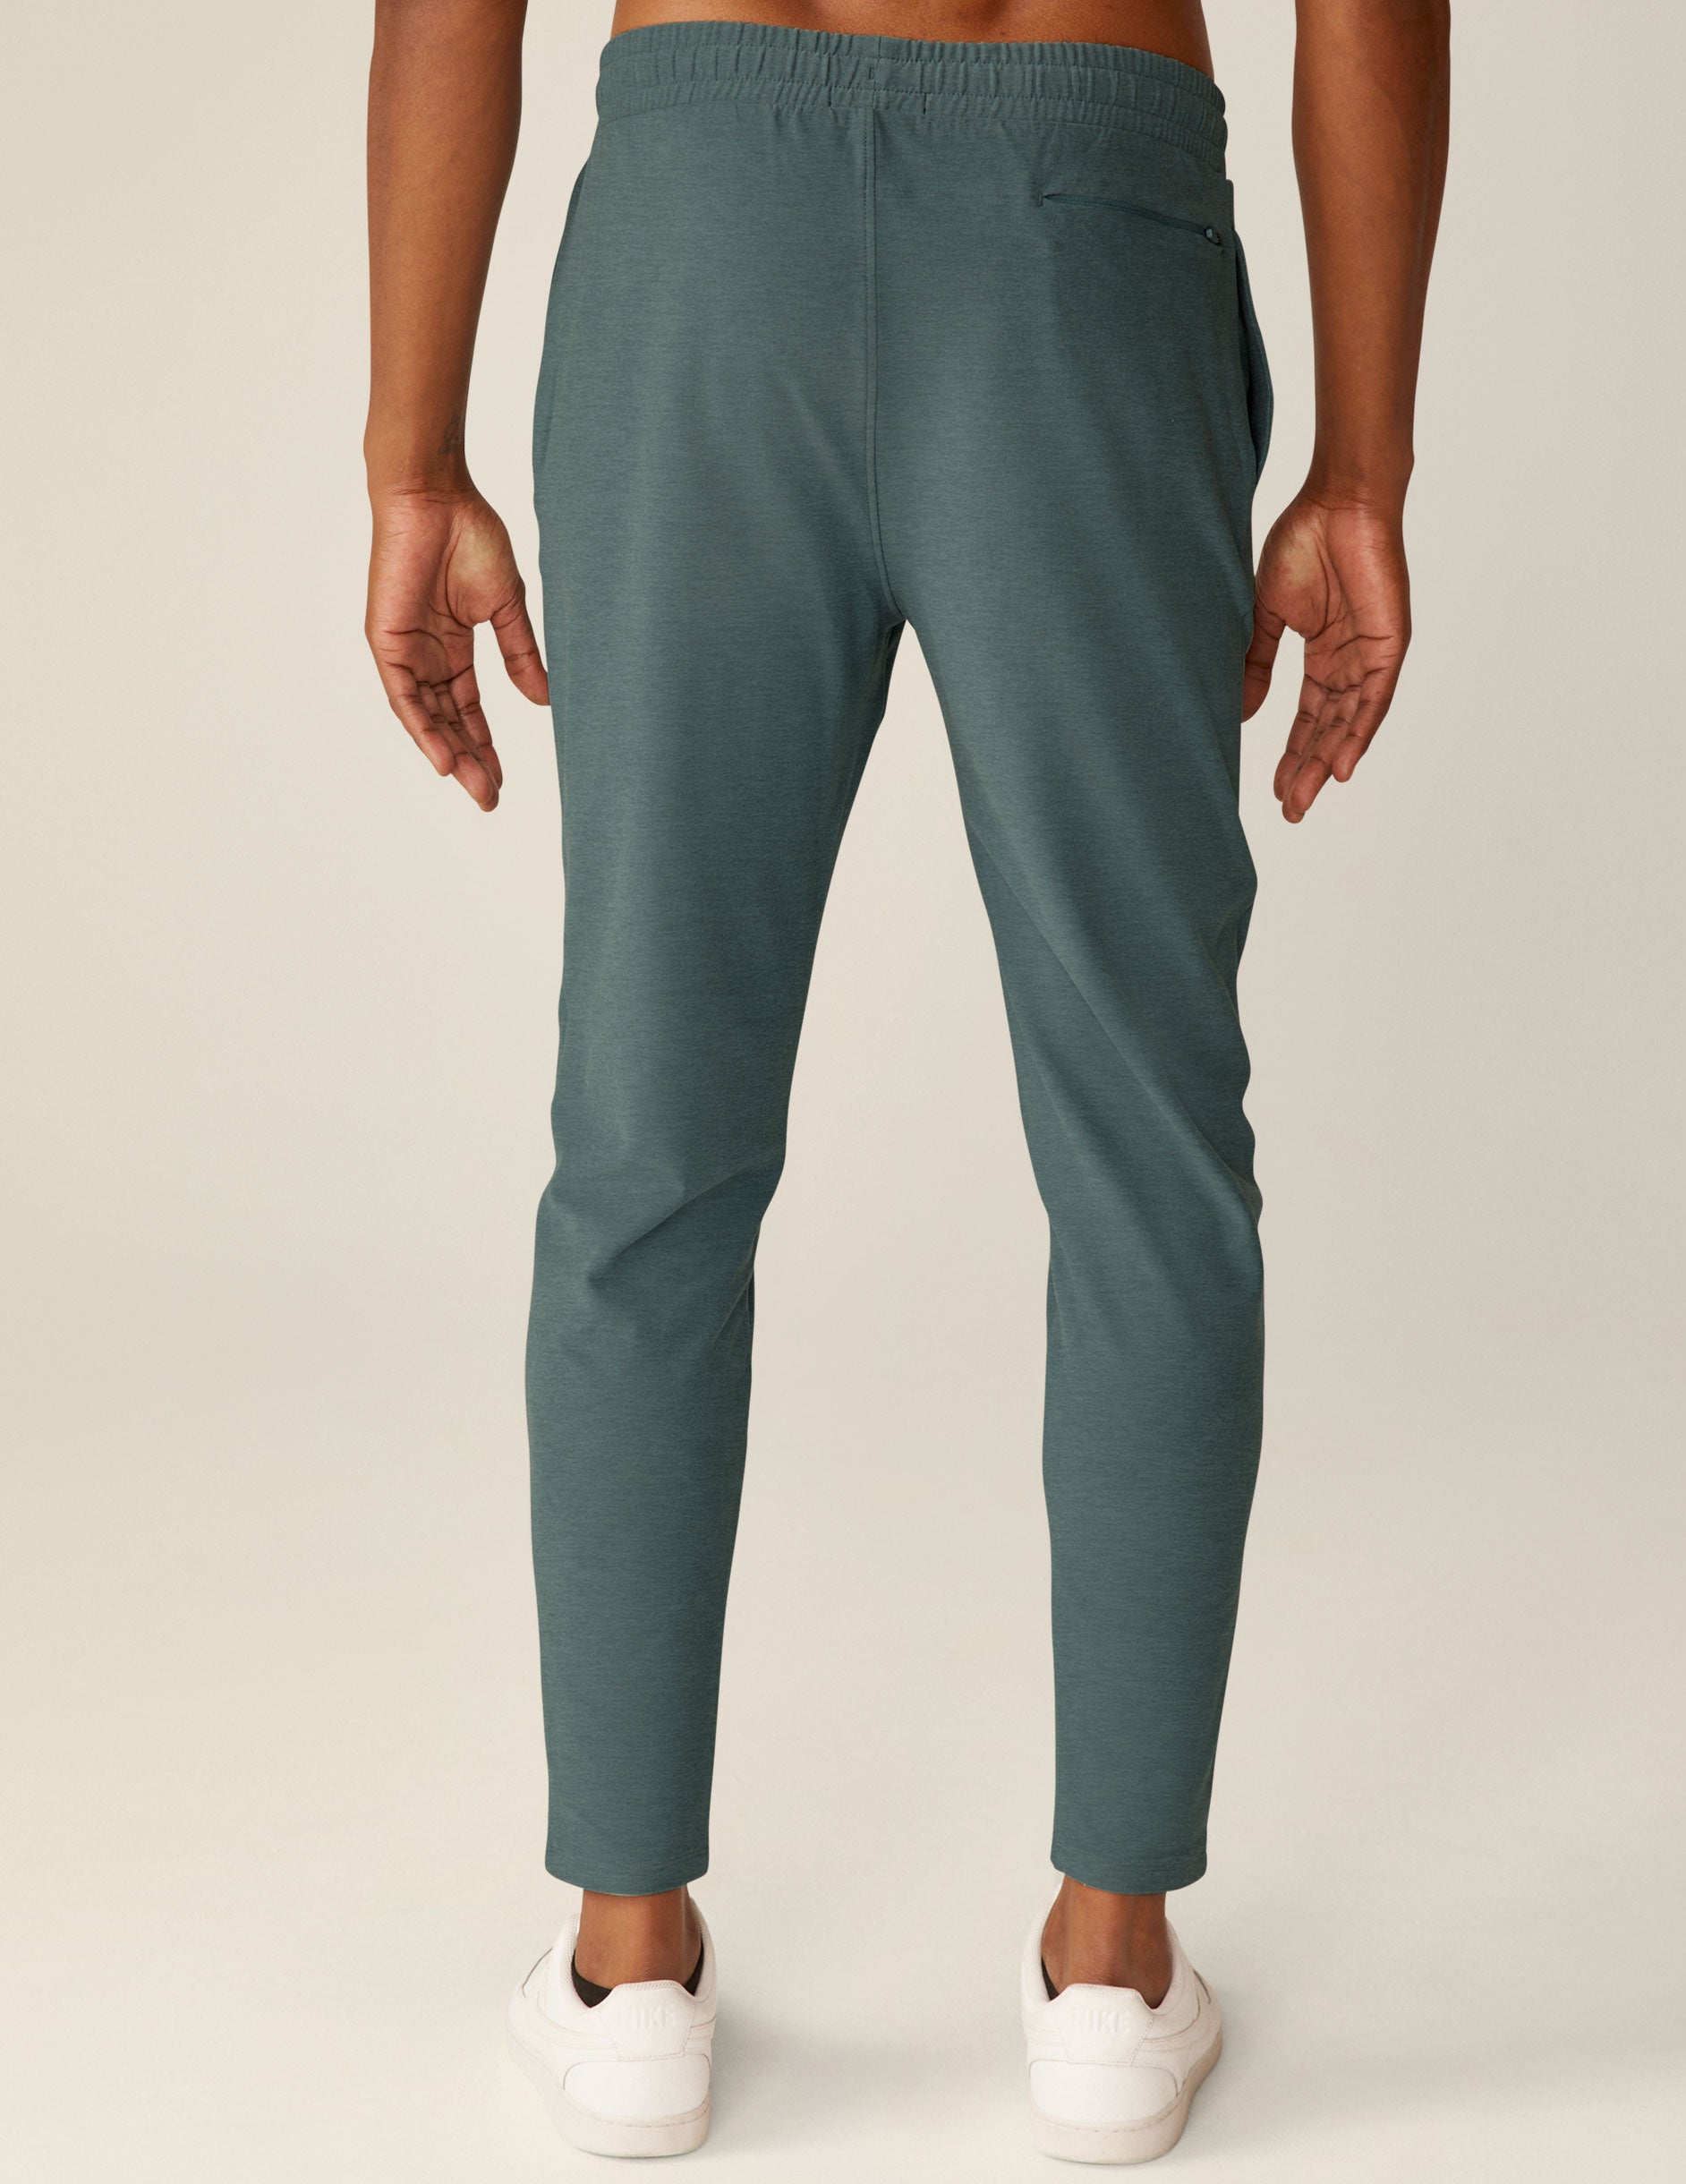 blue men's athleisure pants with pockets. 